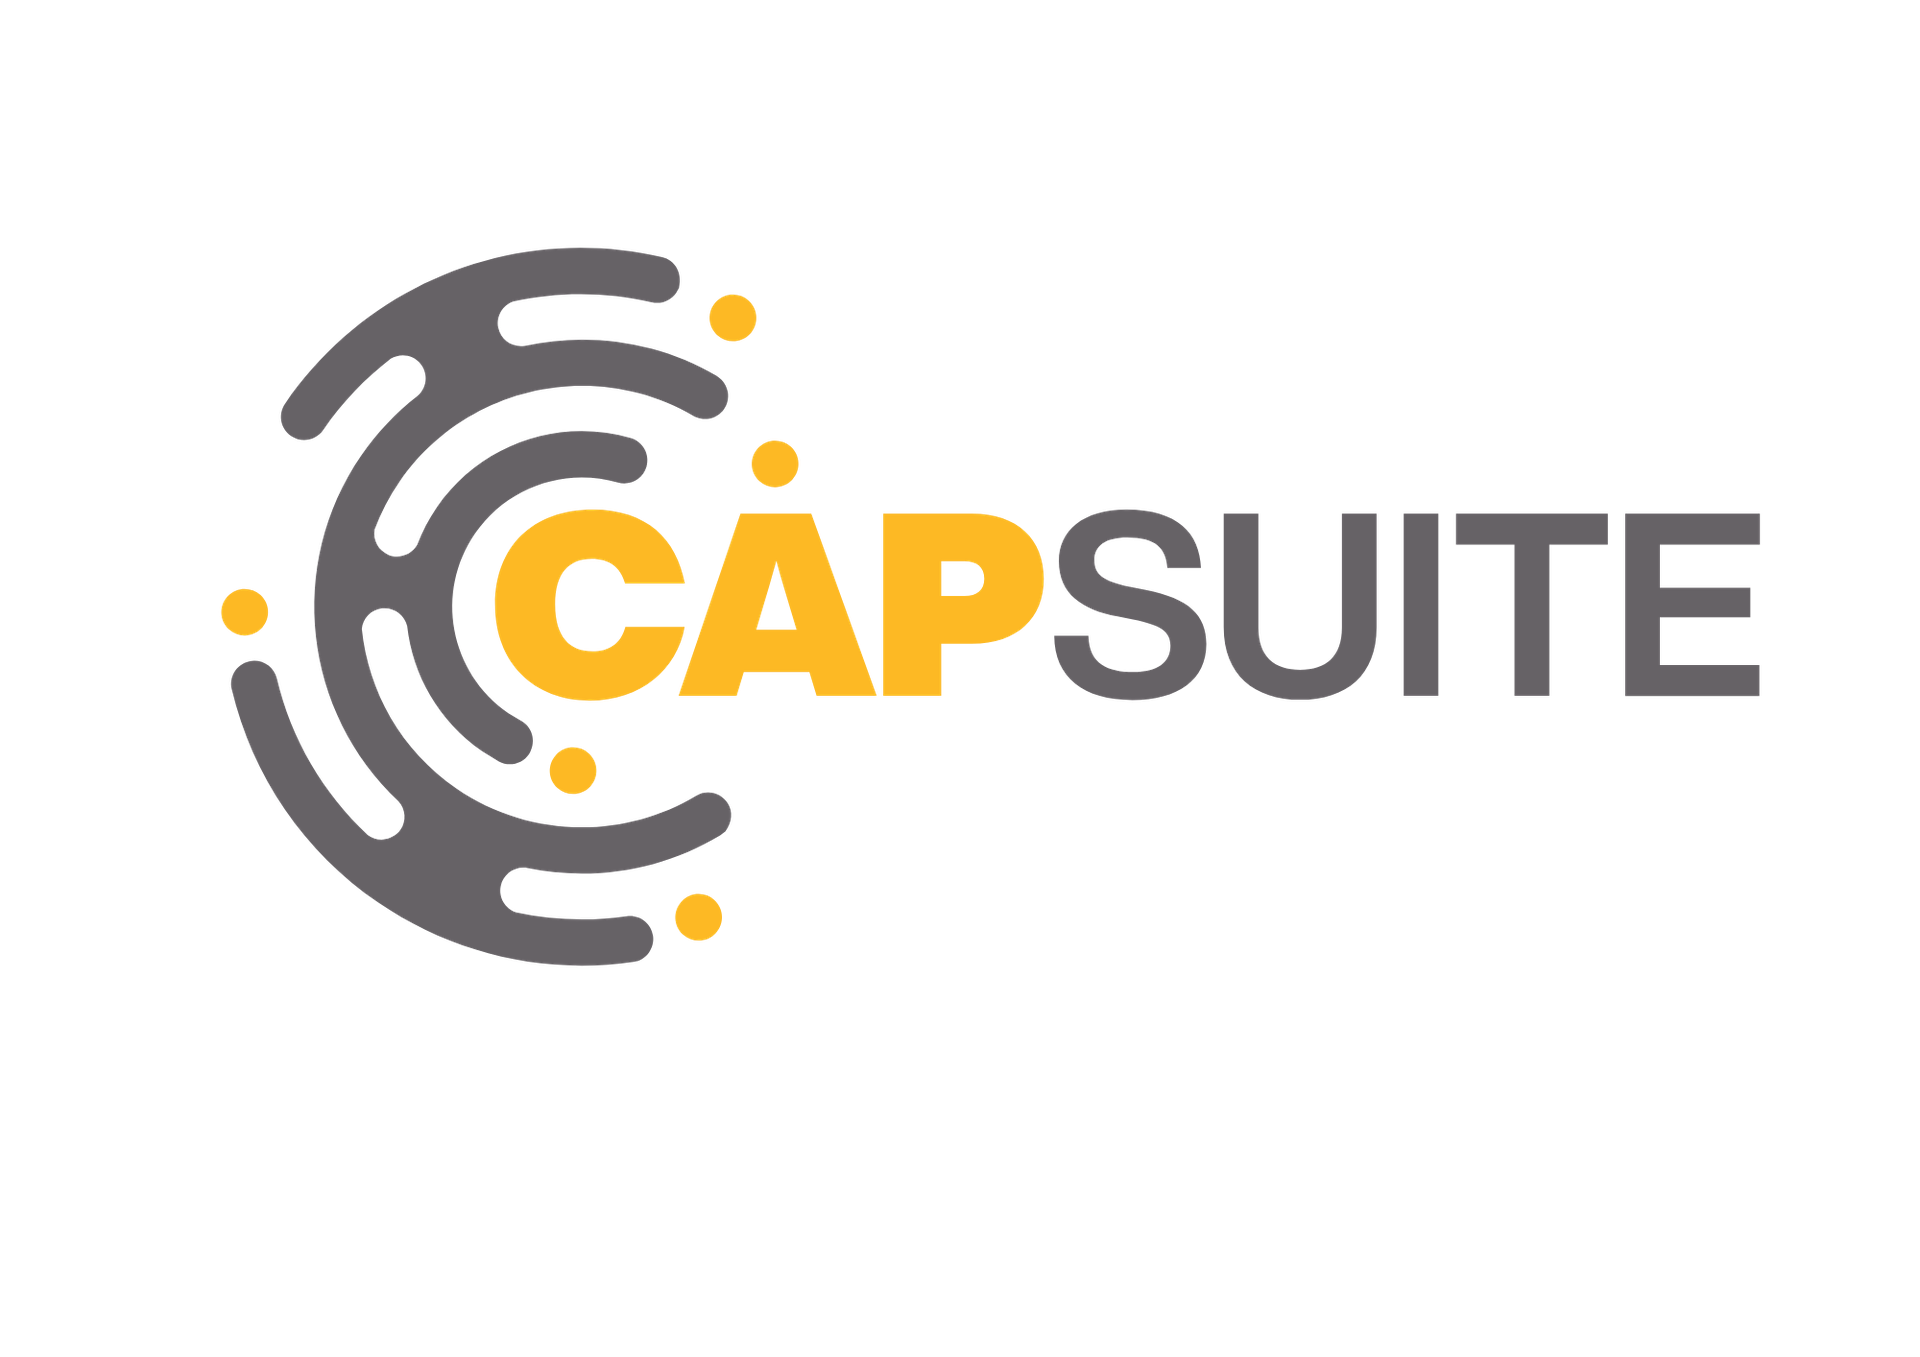 Capsuite Limited